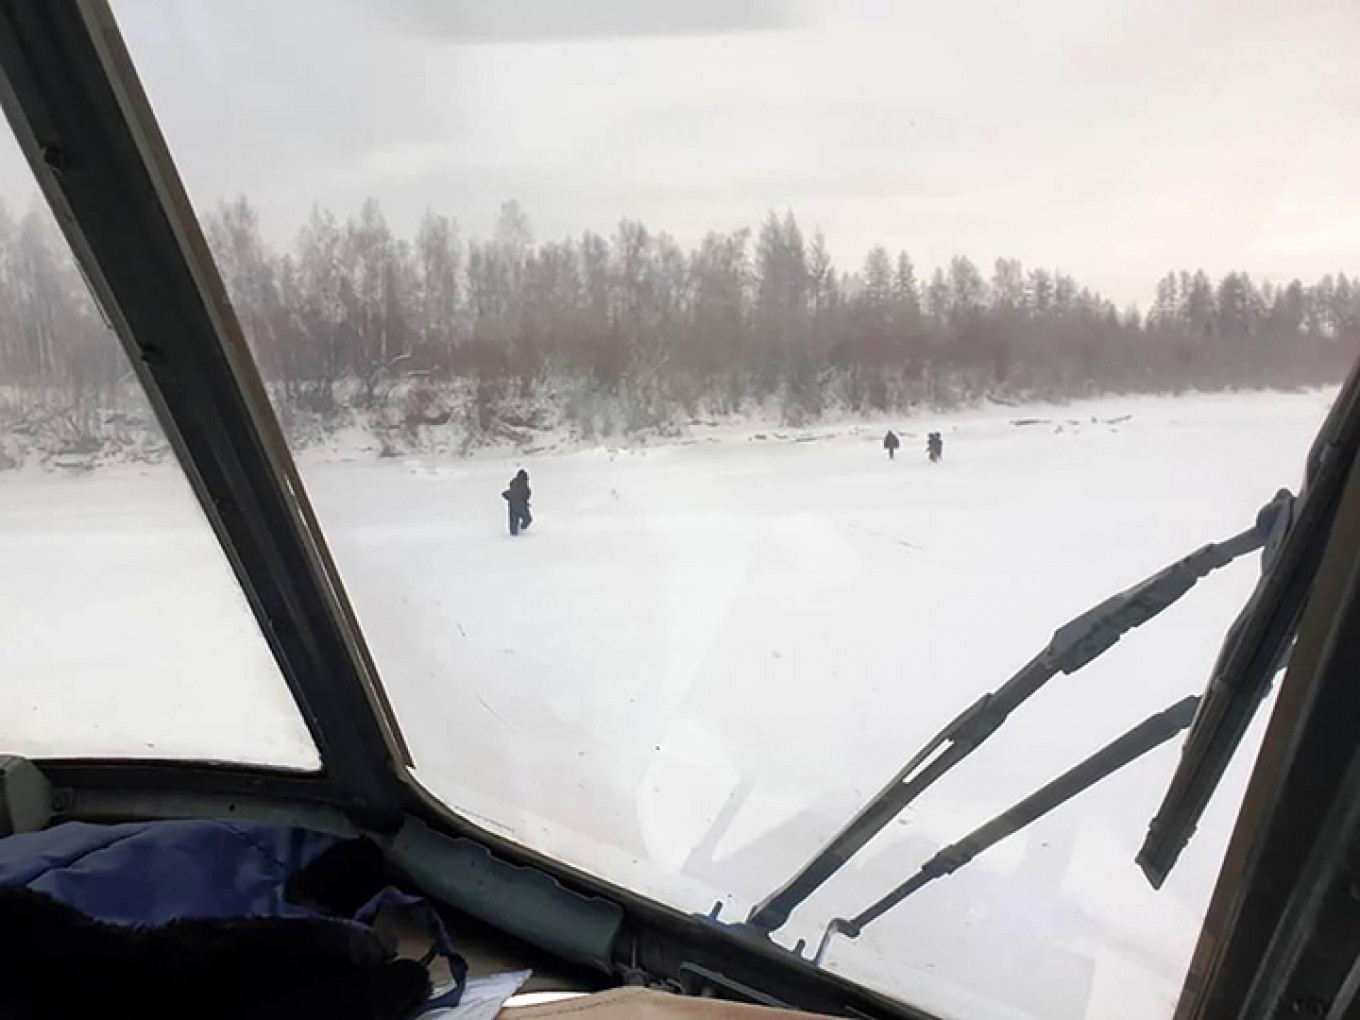 4 Russians Saved From Freezing Far North in Chance Encounter